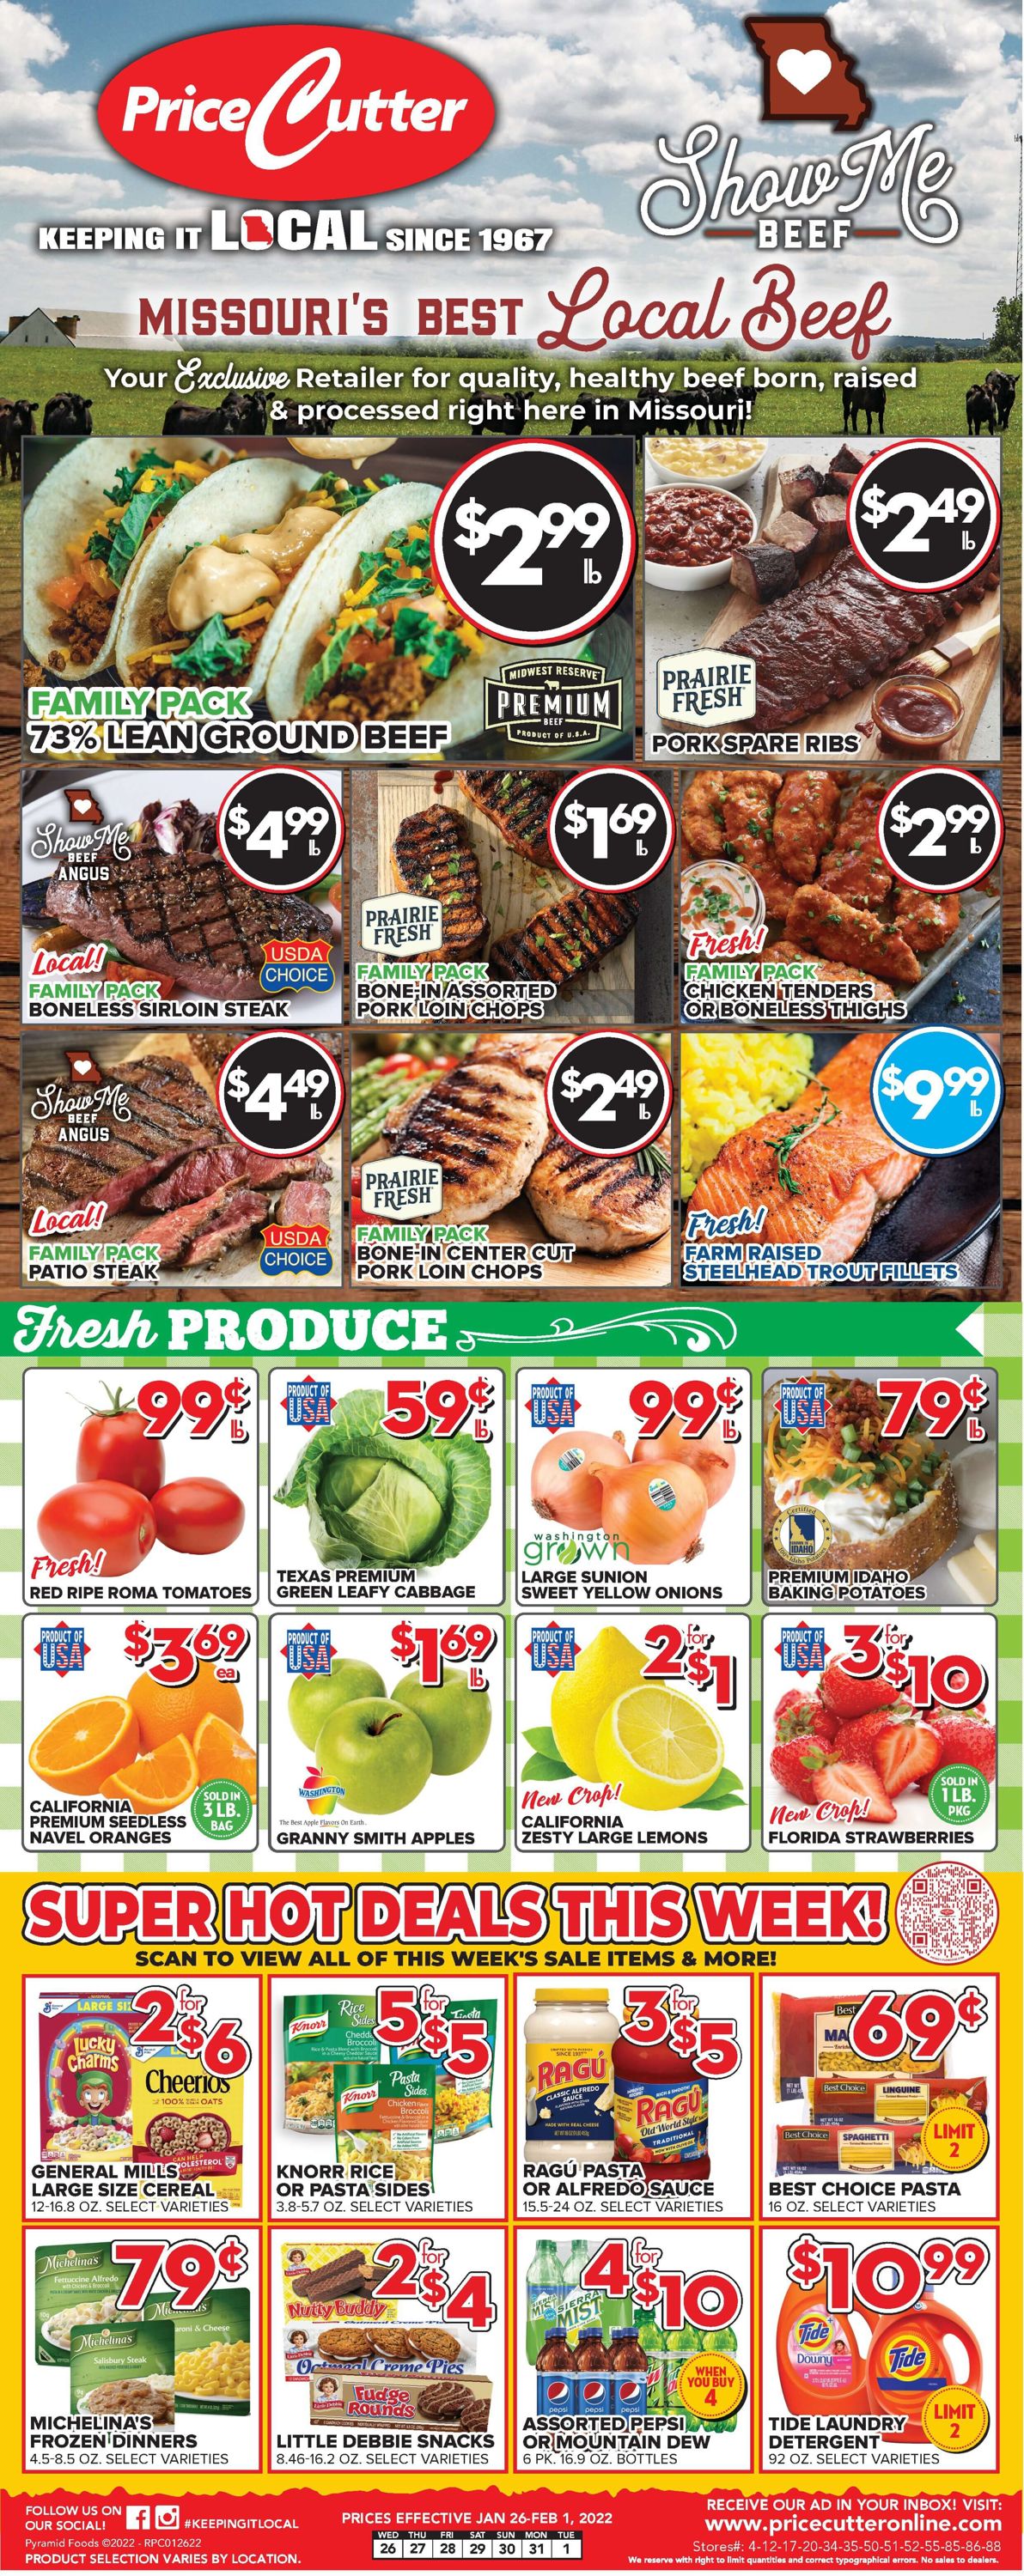 Price Cutter Weekly Ad Circular - valid 01/26-02/01/2022